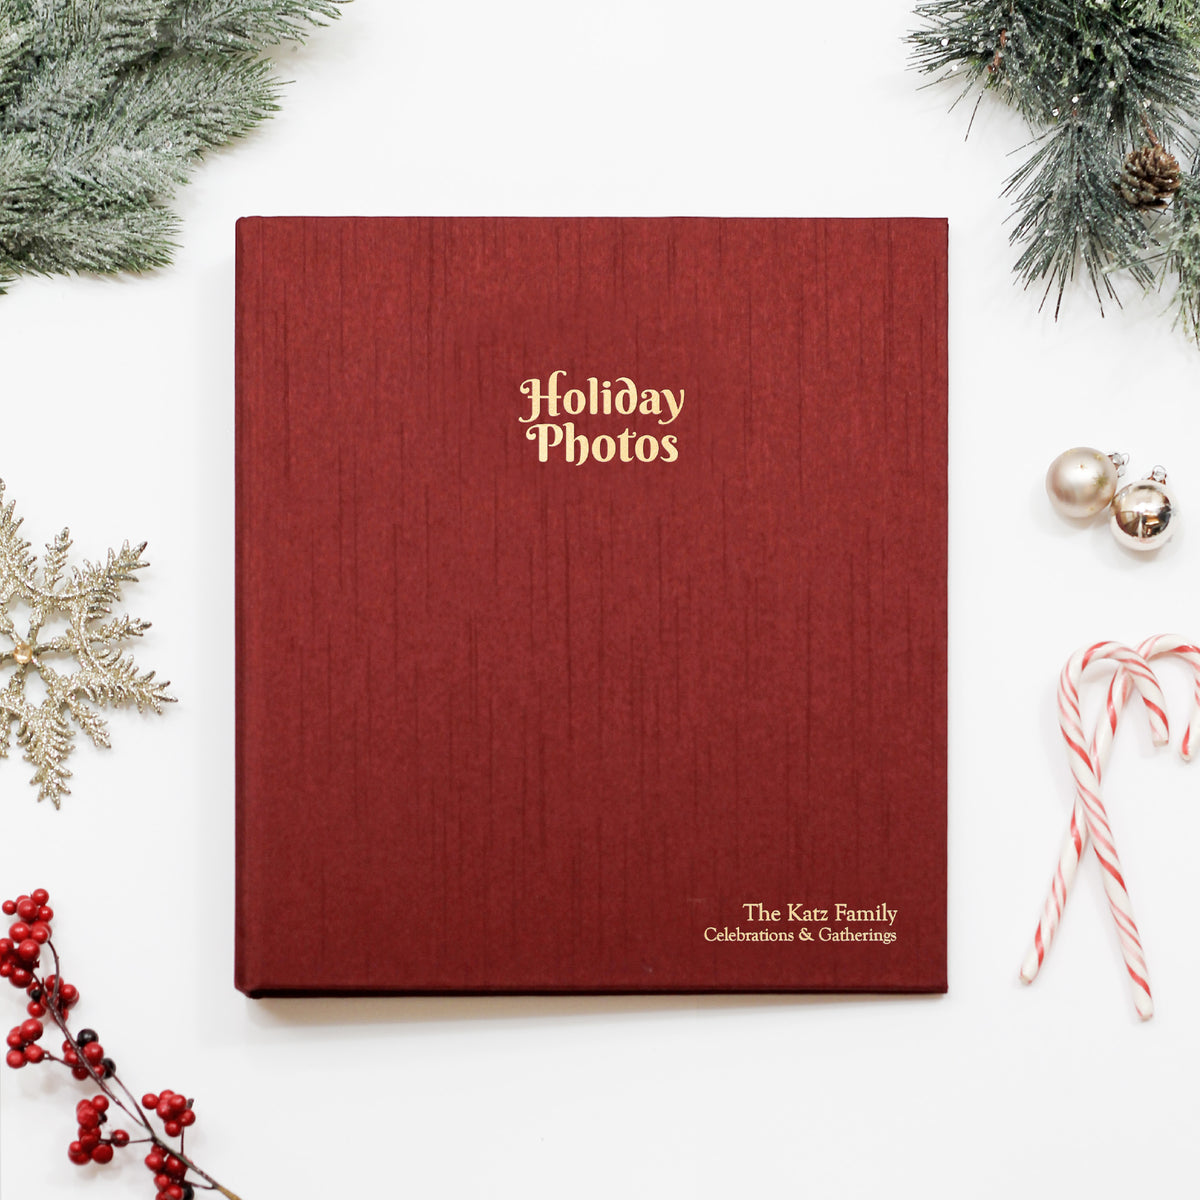 Large Holiday Photo Binder with Garnet Silk Cover for 4x6 or 5x7 Photos